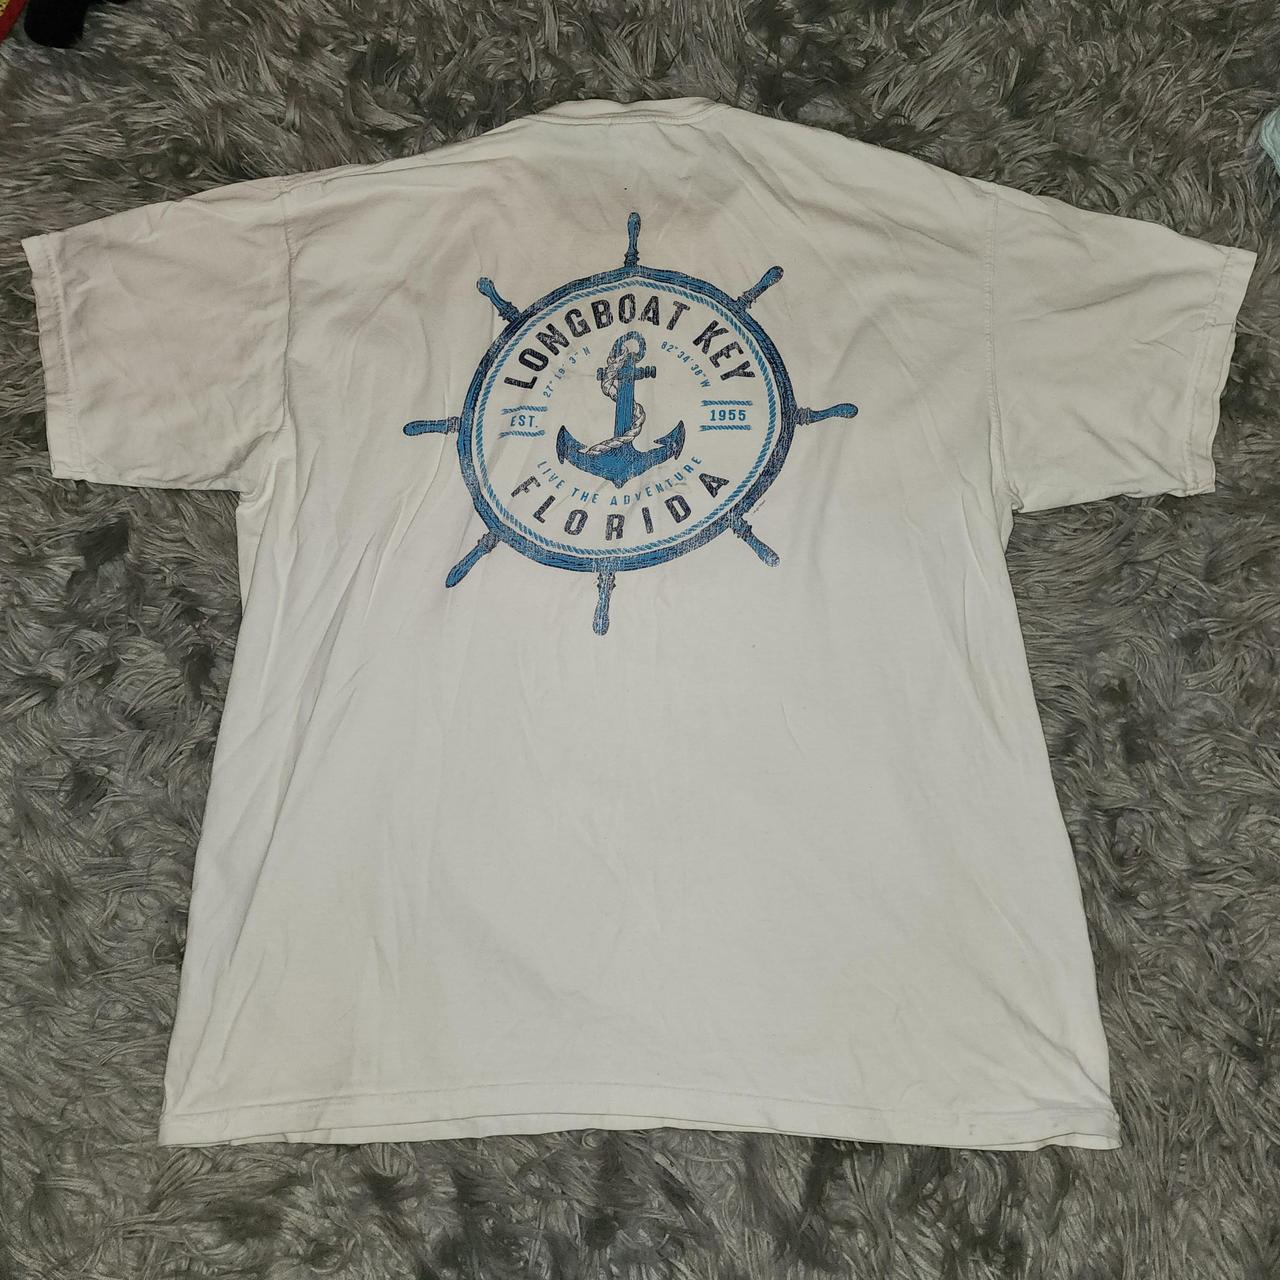 Longboat Key Florida T-Shirt Minor stain on the front - Depop